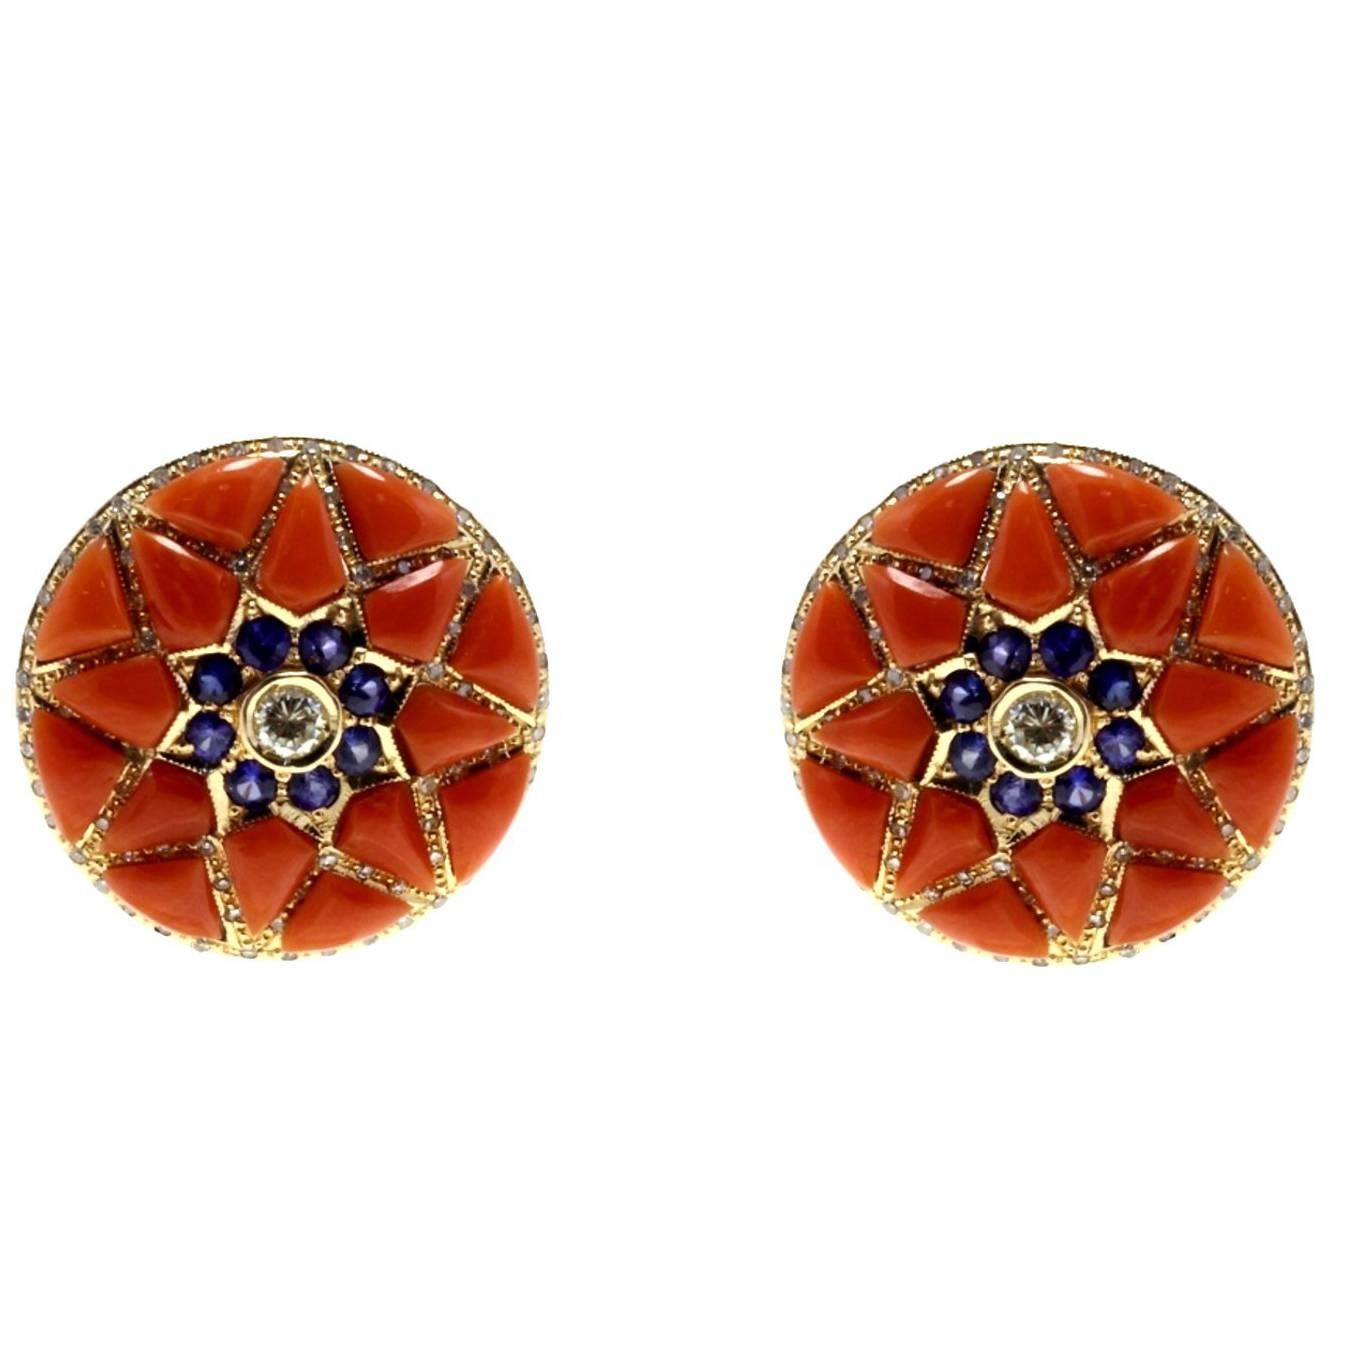 Diamonds, Blue Sapphire Flowers, Red Coral Flowers, Rose Gold Clip-on Earrings